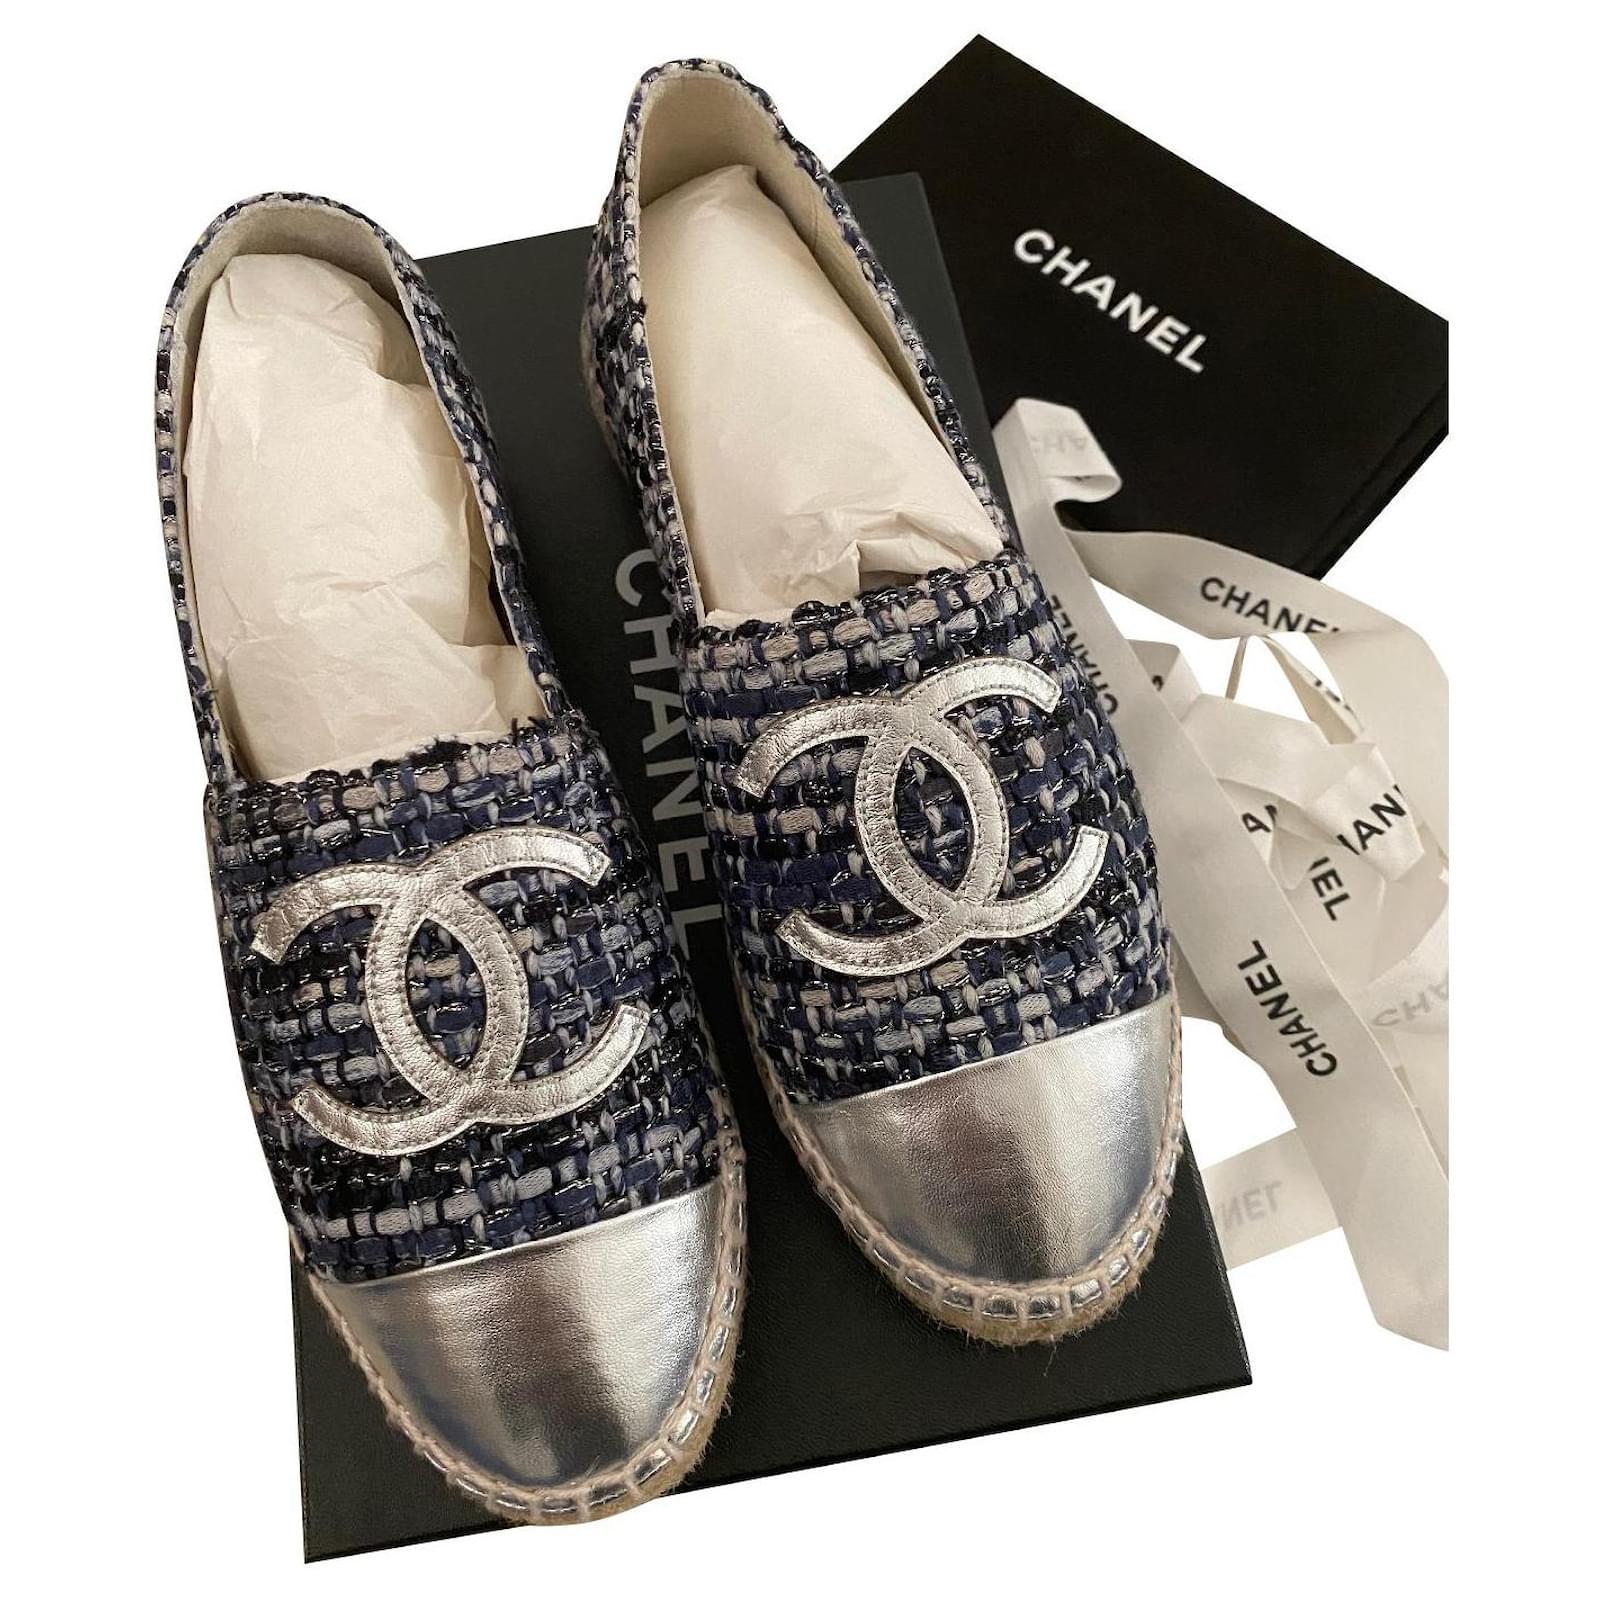 Chanel CC Espadrilles in Lambskin Leather and Gold Hardware Size 36 EUR  225 cm